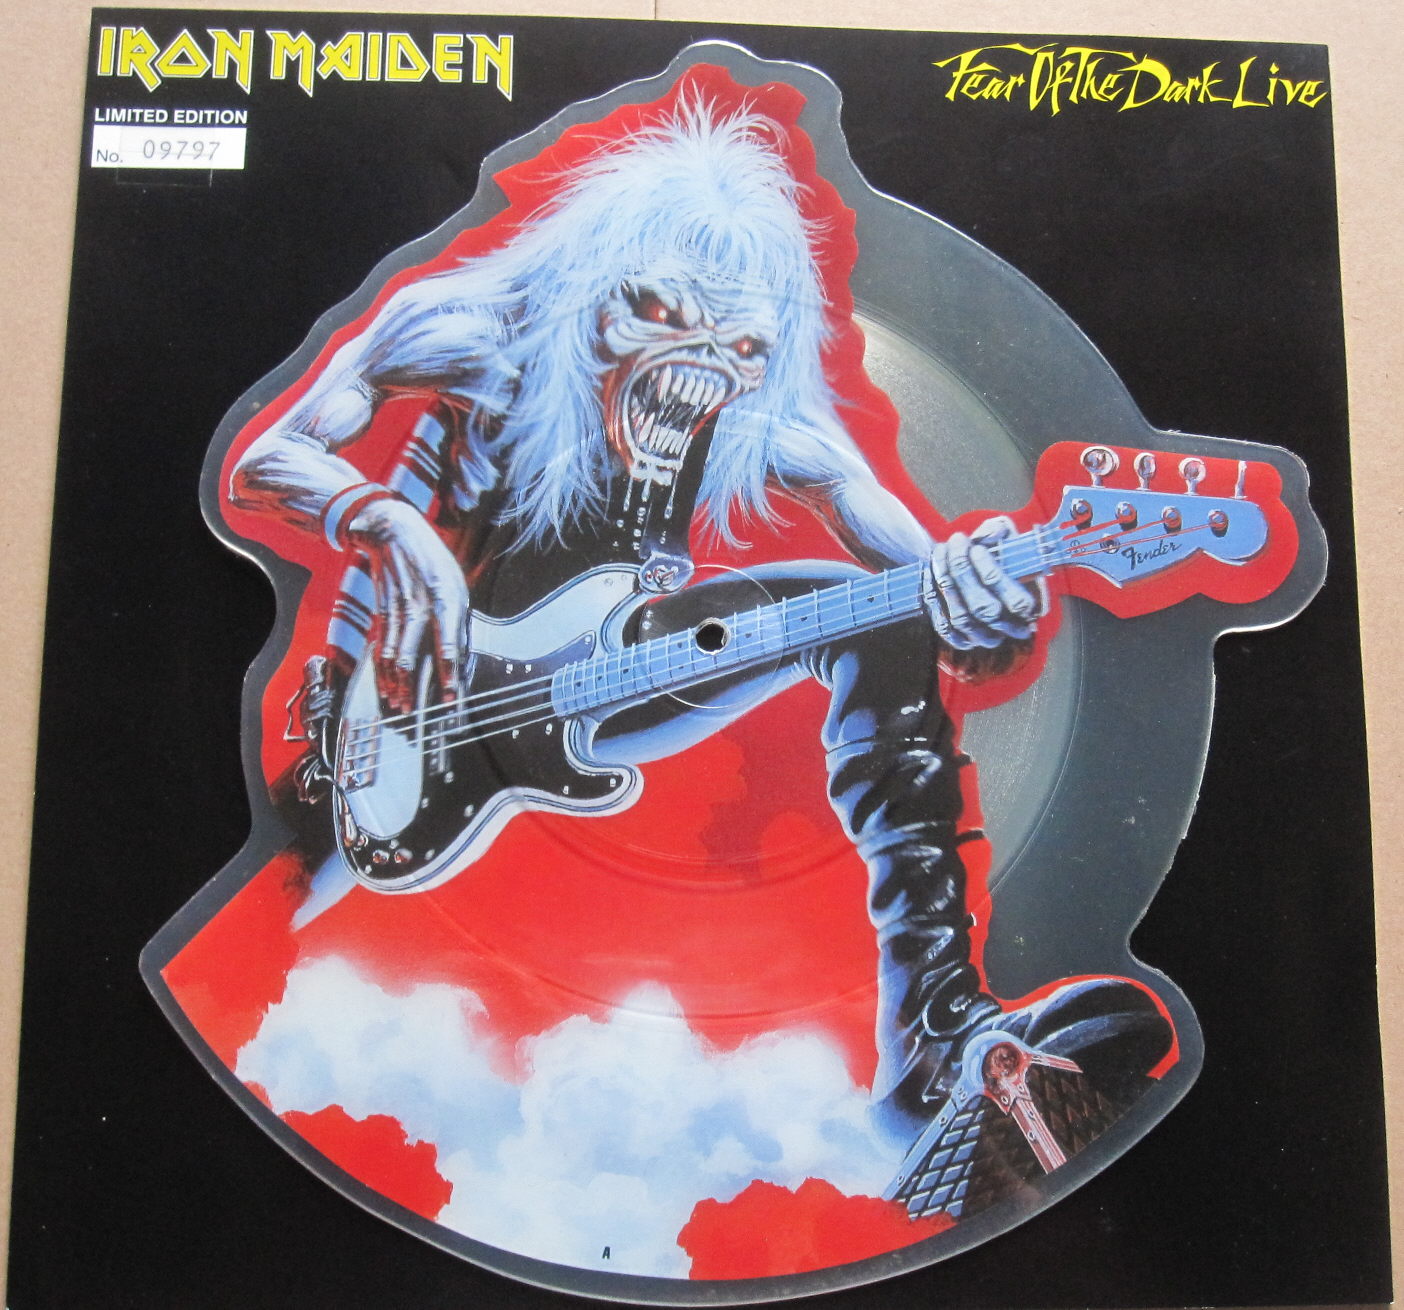 IRON_MAIDEN_FEAR_OF_THE_DARK_live_SHAPE_PICTURE_DISC.jpg